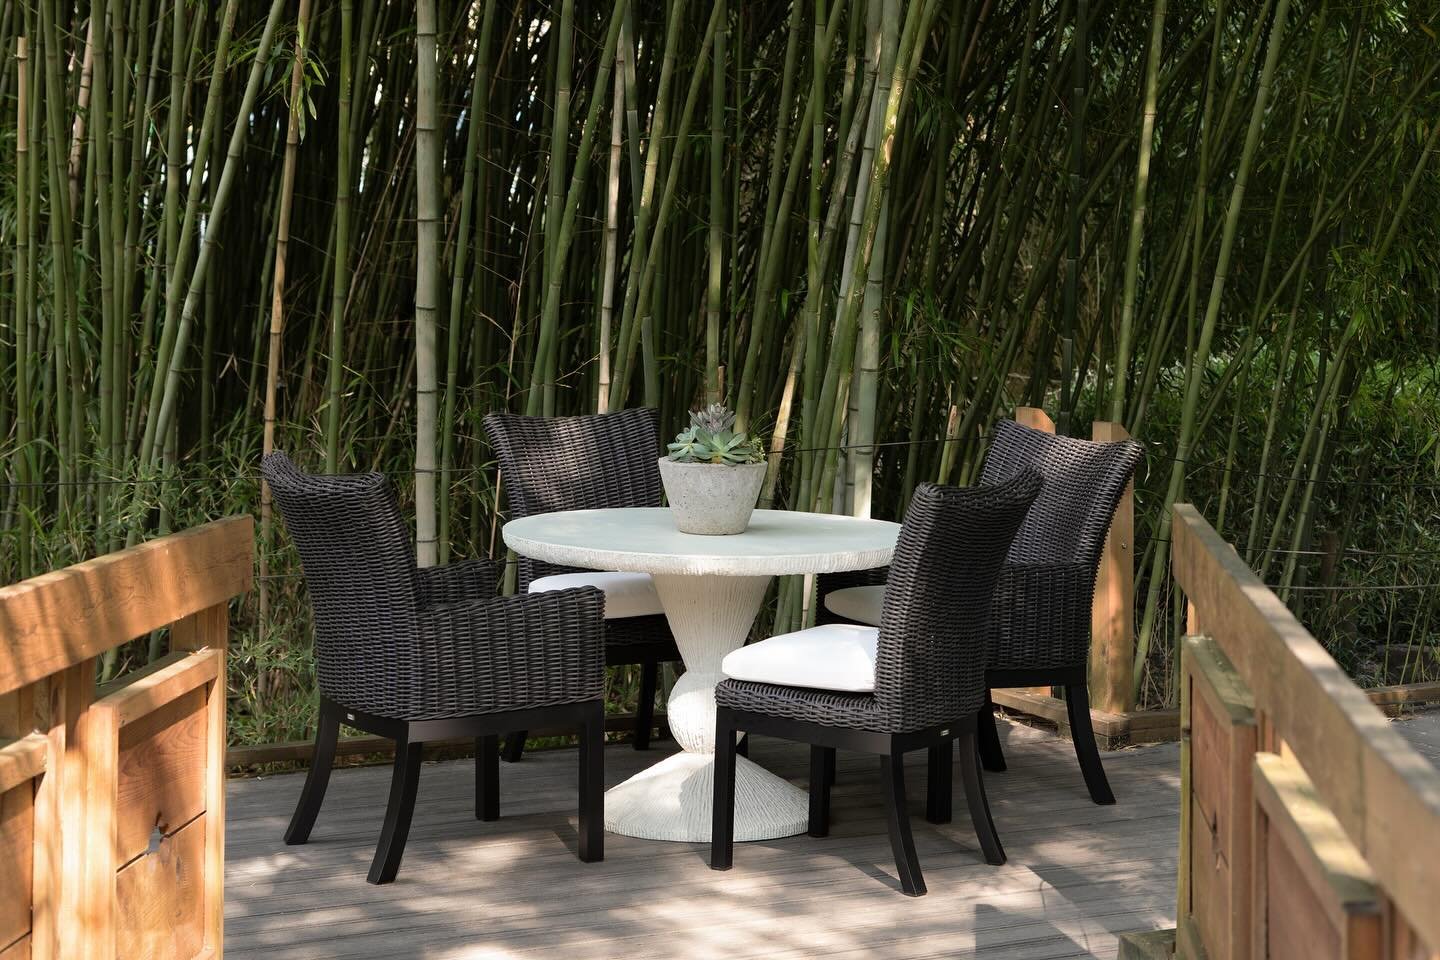 Elegant and sophisticated this summer! @summerclassics makes it simple to create a sophisticated look that reflects your individual taste and lifestyle. 🖤🤩#outdoor #outdoorliving #liveoutside #chenal #diningoutside #outdoorspaces #littlerock #backy